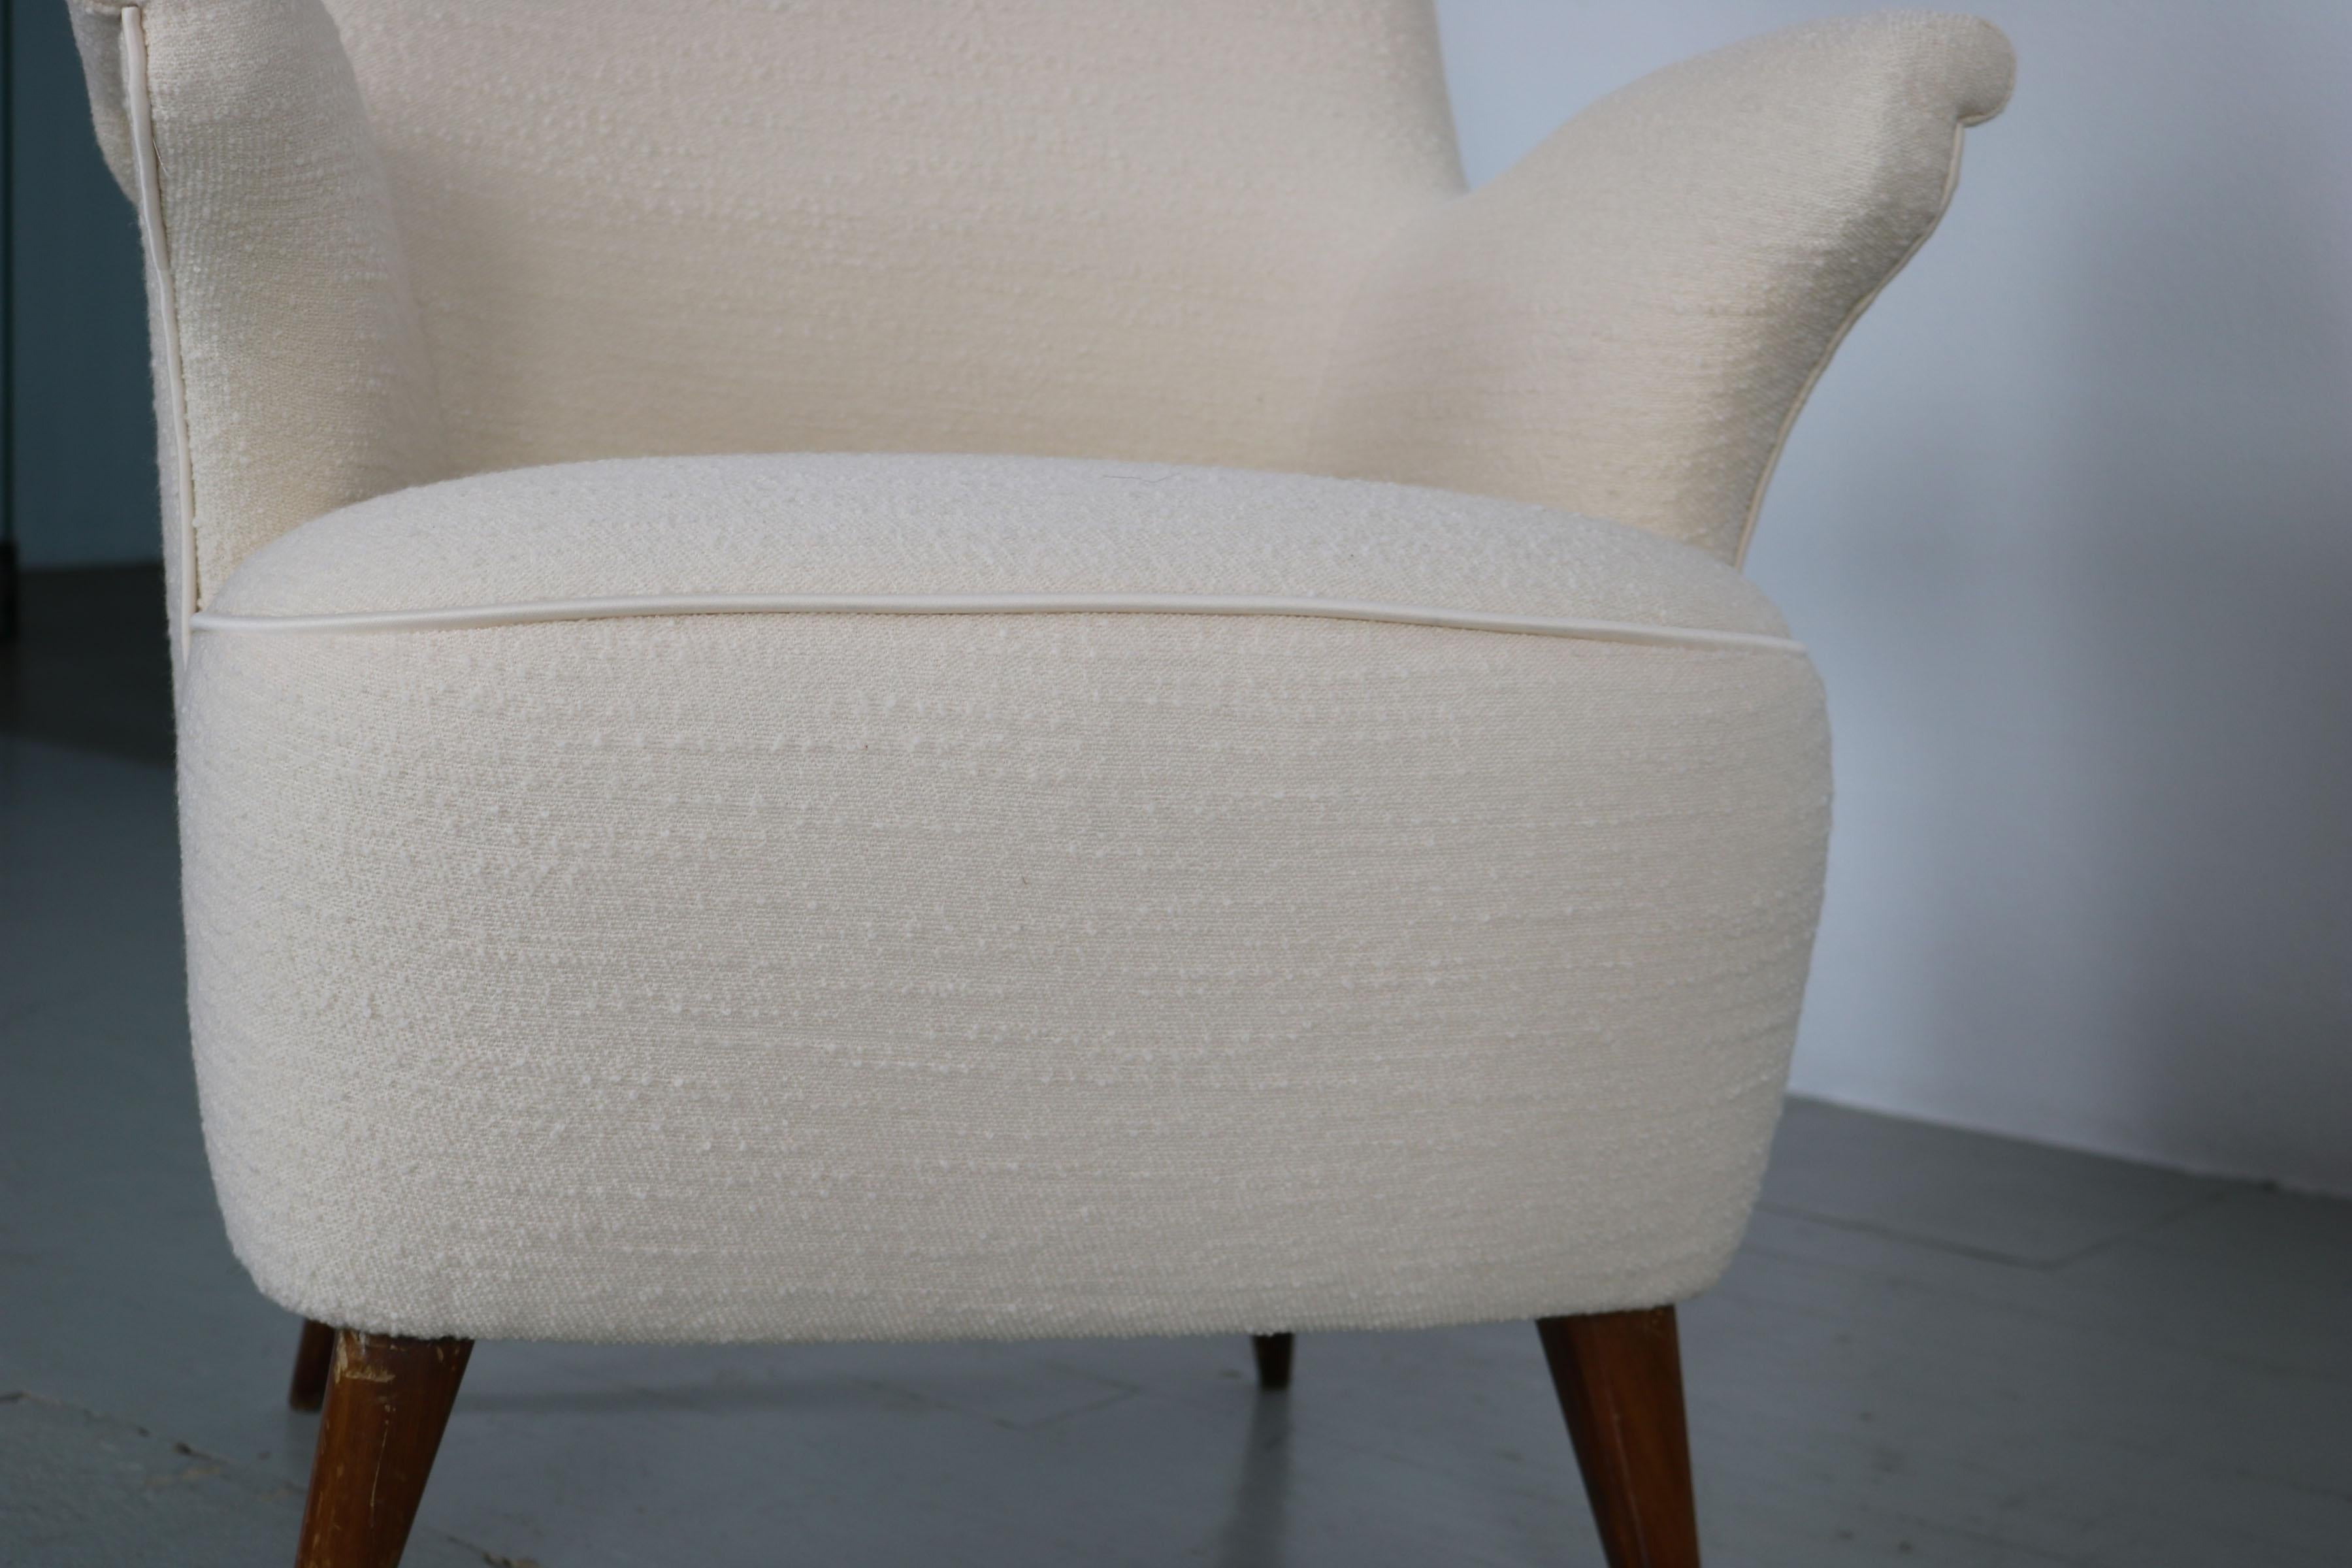 Set of 2 Cream Coloured Italian Marine Armchairs from the 1950s For Sale 7